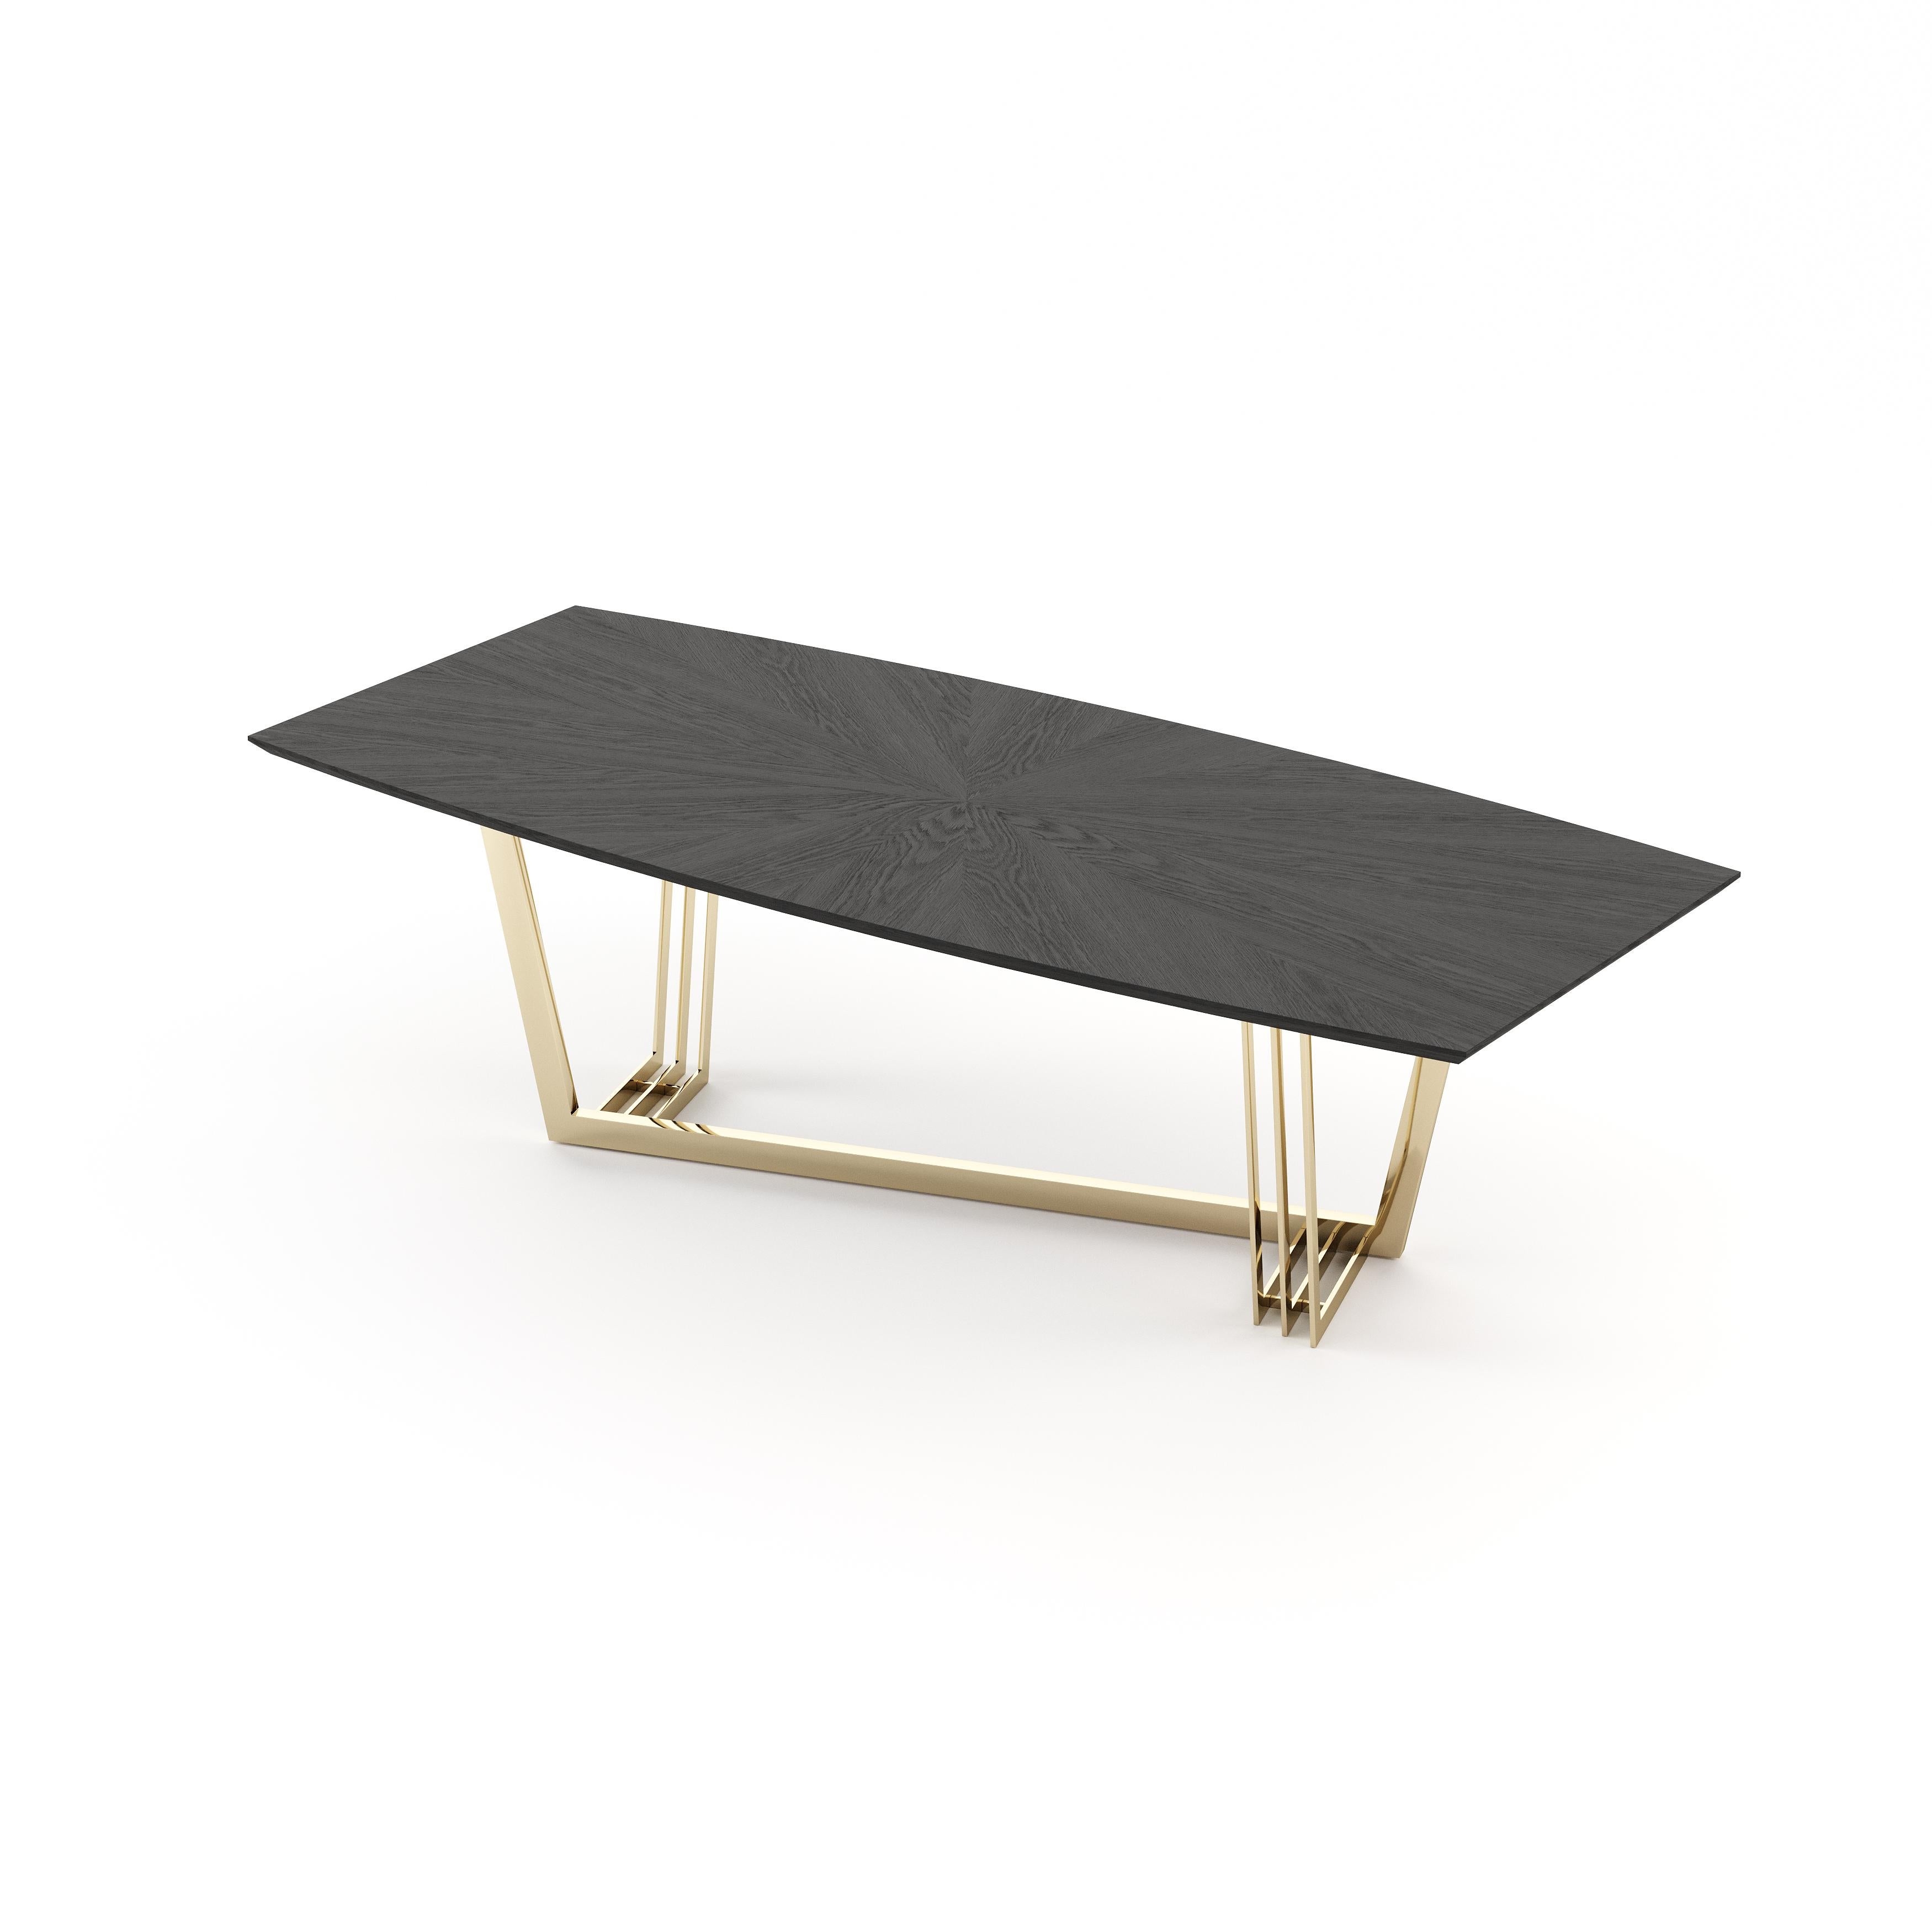 Portuguese Modern Dining table with metallic accent and custom dimensions by Laskasas For Sale